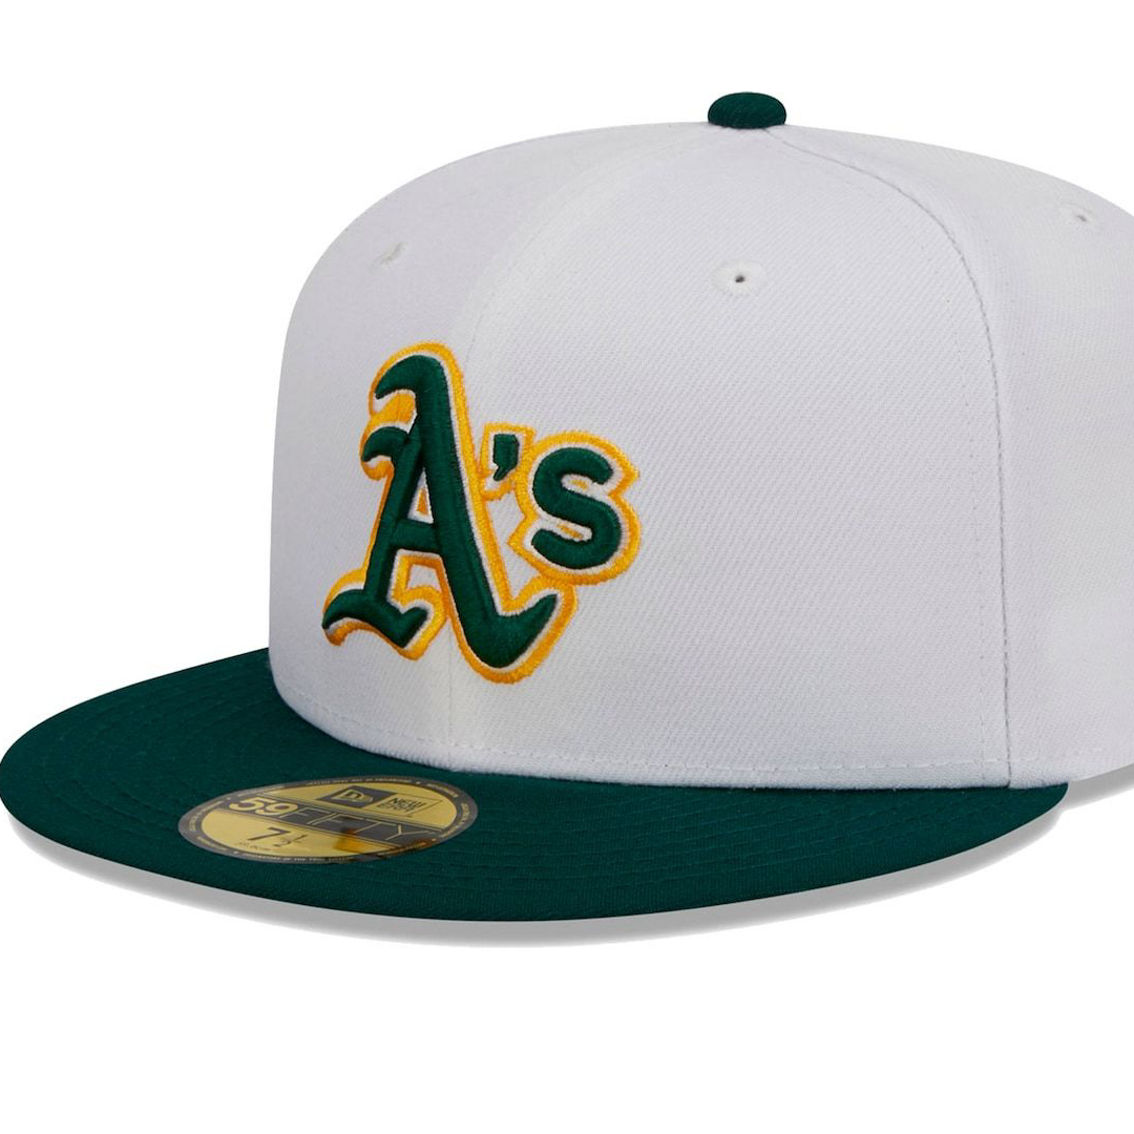 New Era Men's White/green Oakland Athletics Optic 59fifty Fitted